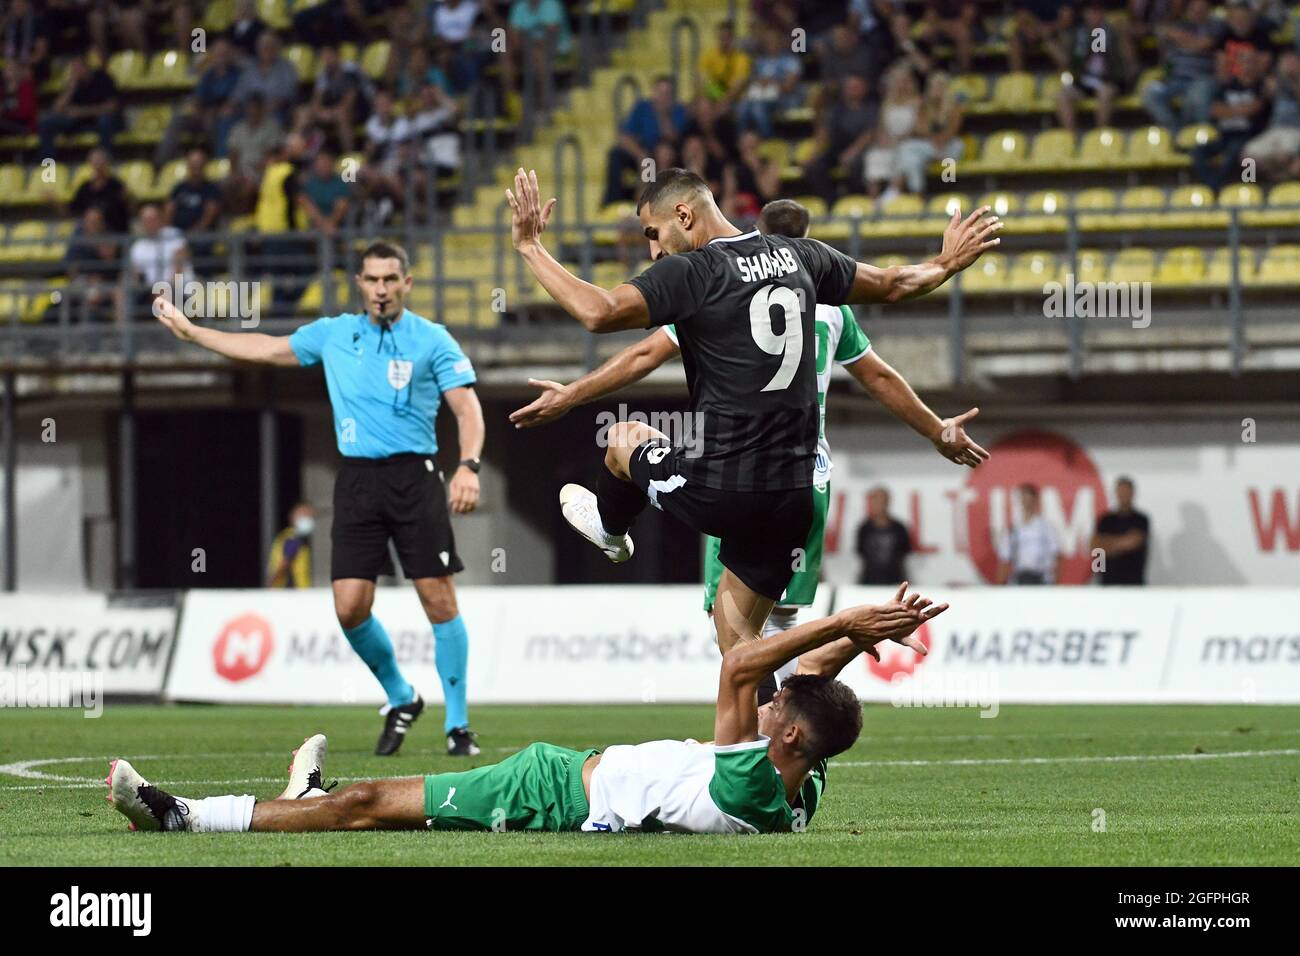 ZAPORIZHZHIA, UKRAINE - AUGUST 26, 2021 - Forward Shahab Zahedi Tabar of FC Zorya Luhansk is seen in action with a player of SK Rapid Wien during the 2021/2022 UEFA Europa League play-off 2nd leg game at the Slavutych Arena, Zaporizhzhia, southeastern Ukraine. Stock Photo